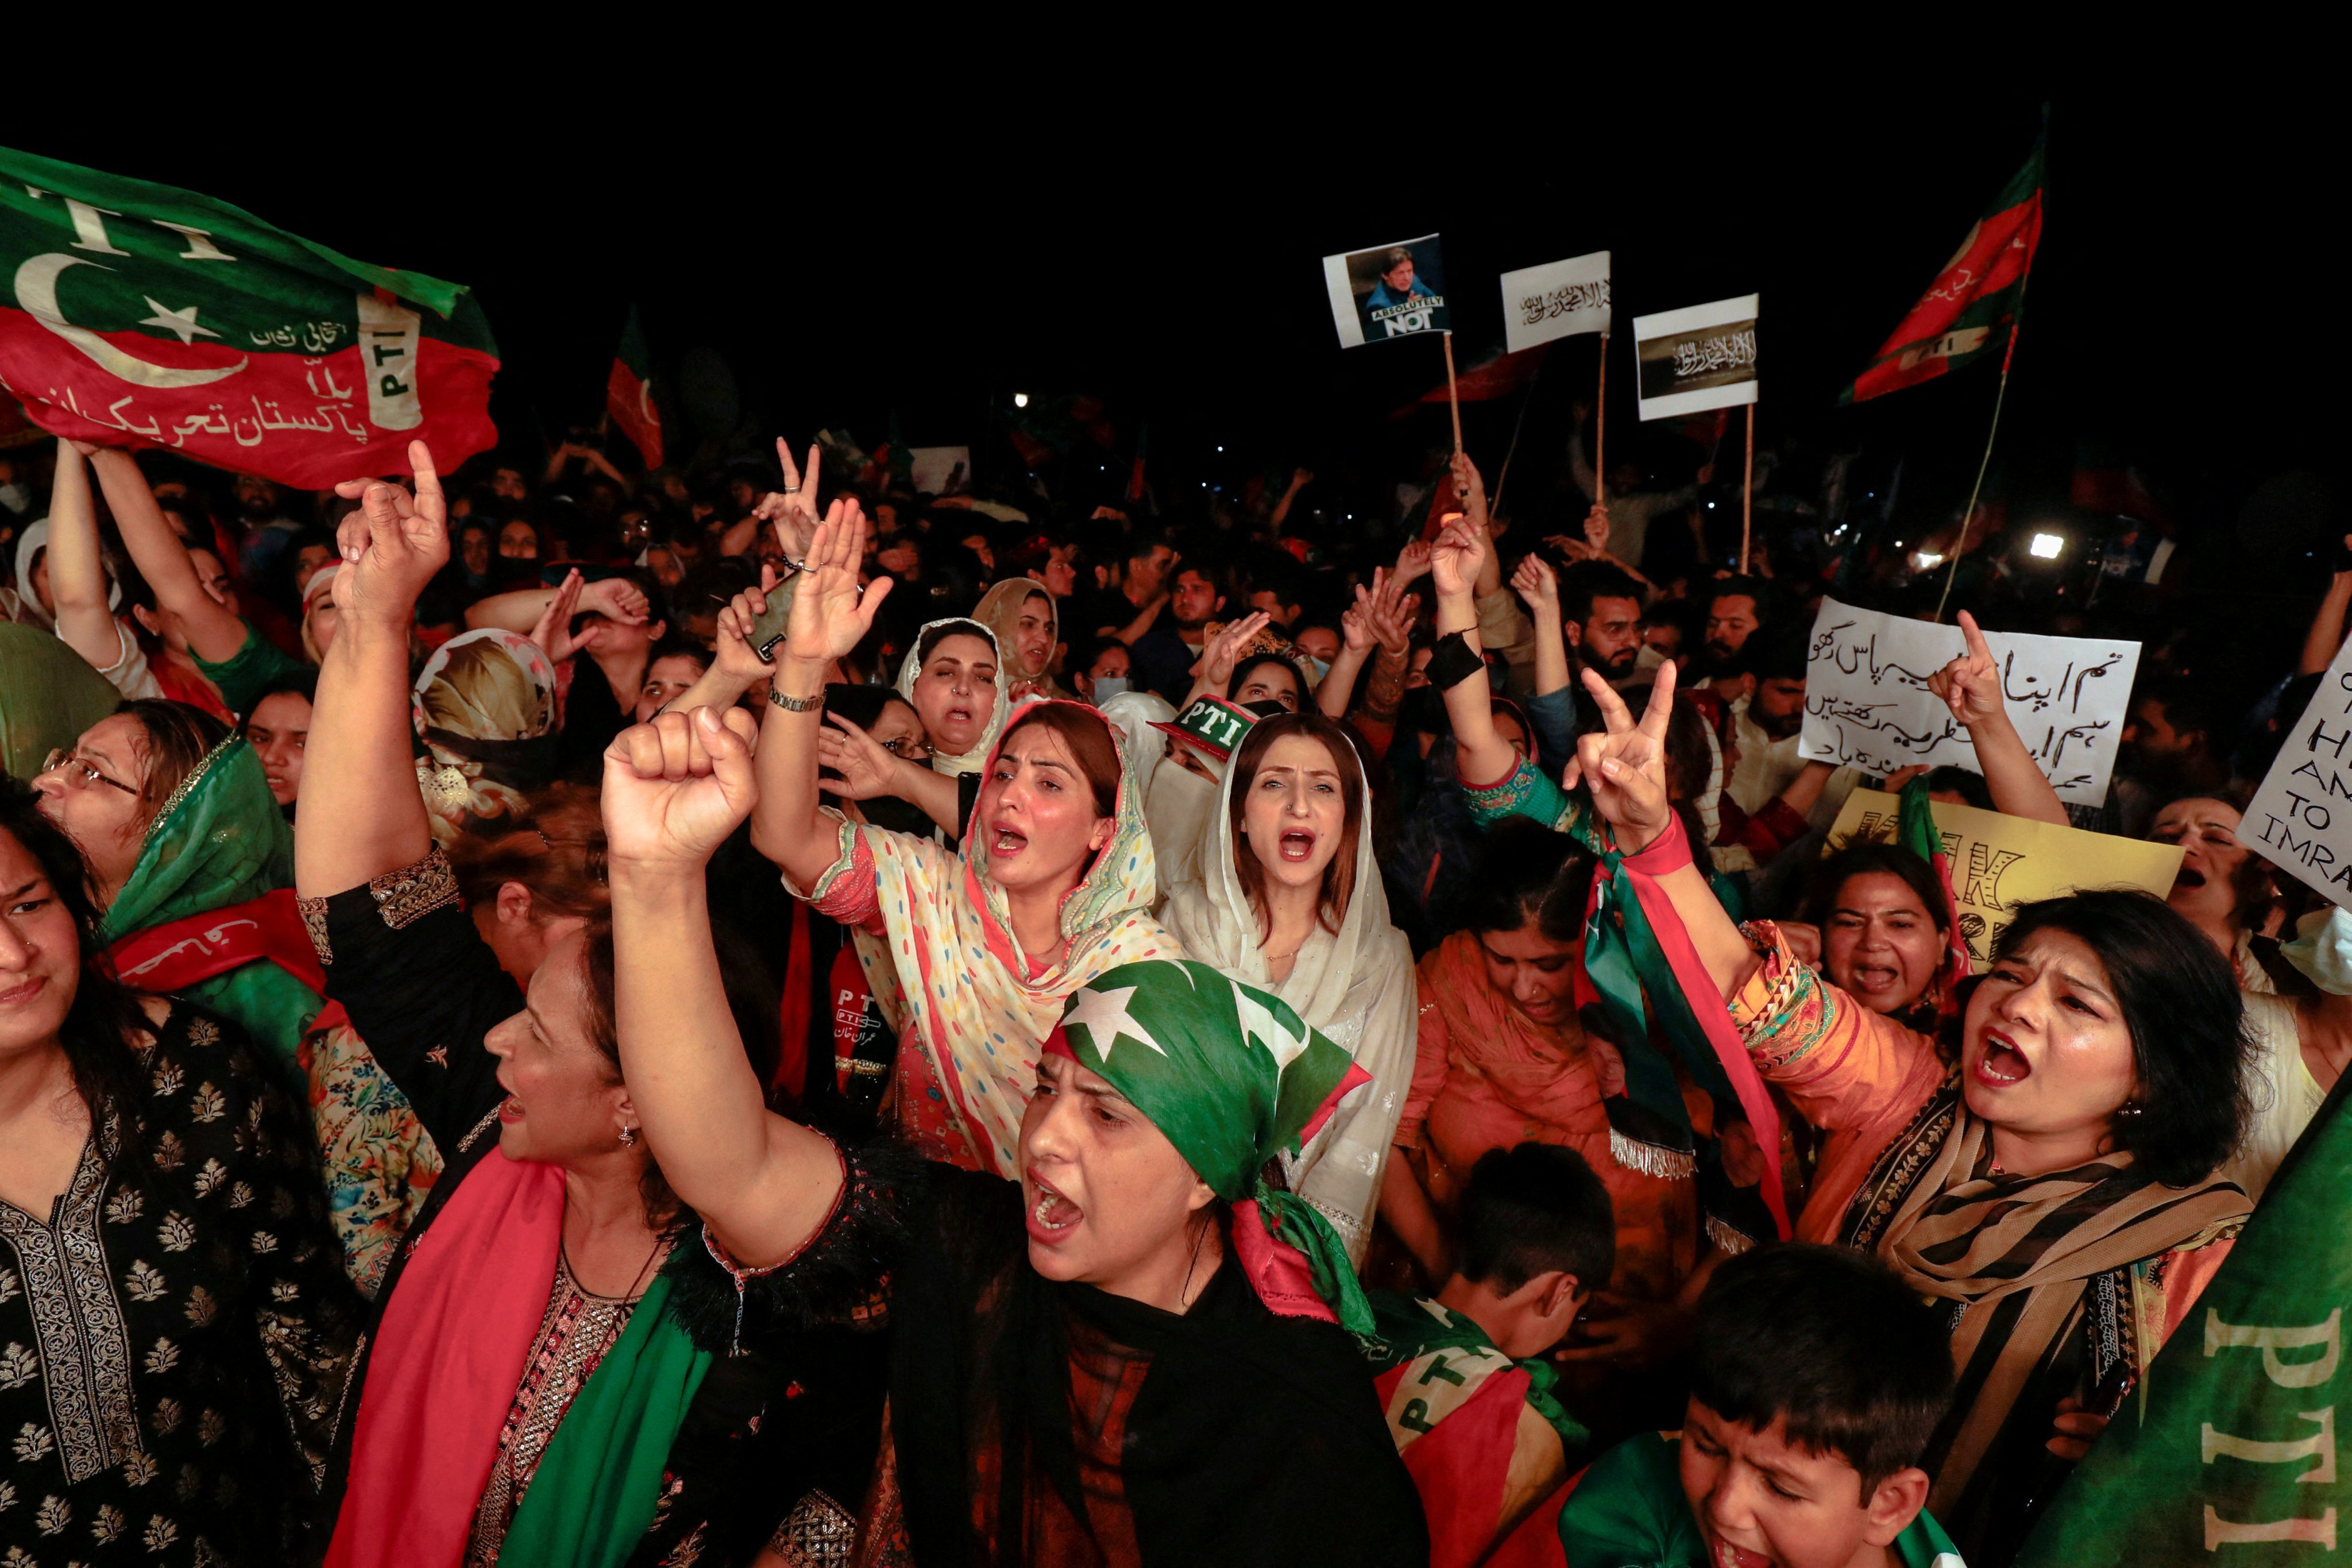 Supporters of the Pakistan Tehreek-e-Insaf (PTI) political party rally in support of former Pakistani Prime Minister Imran Khan in Islamabad, Pakistan on April 10. Photo: Reuters